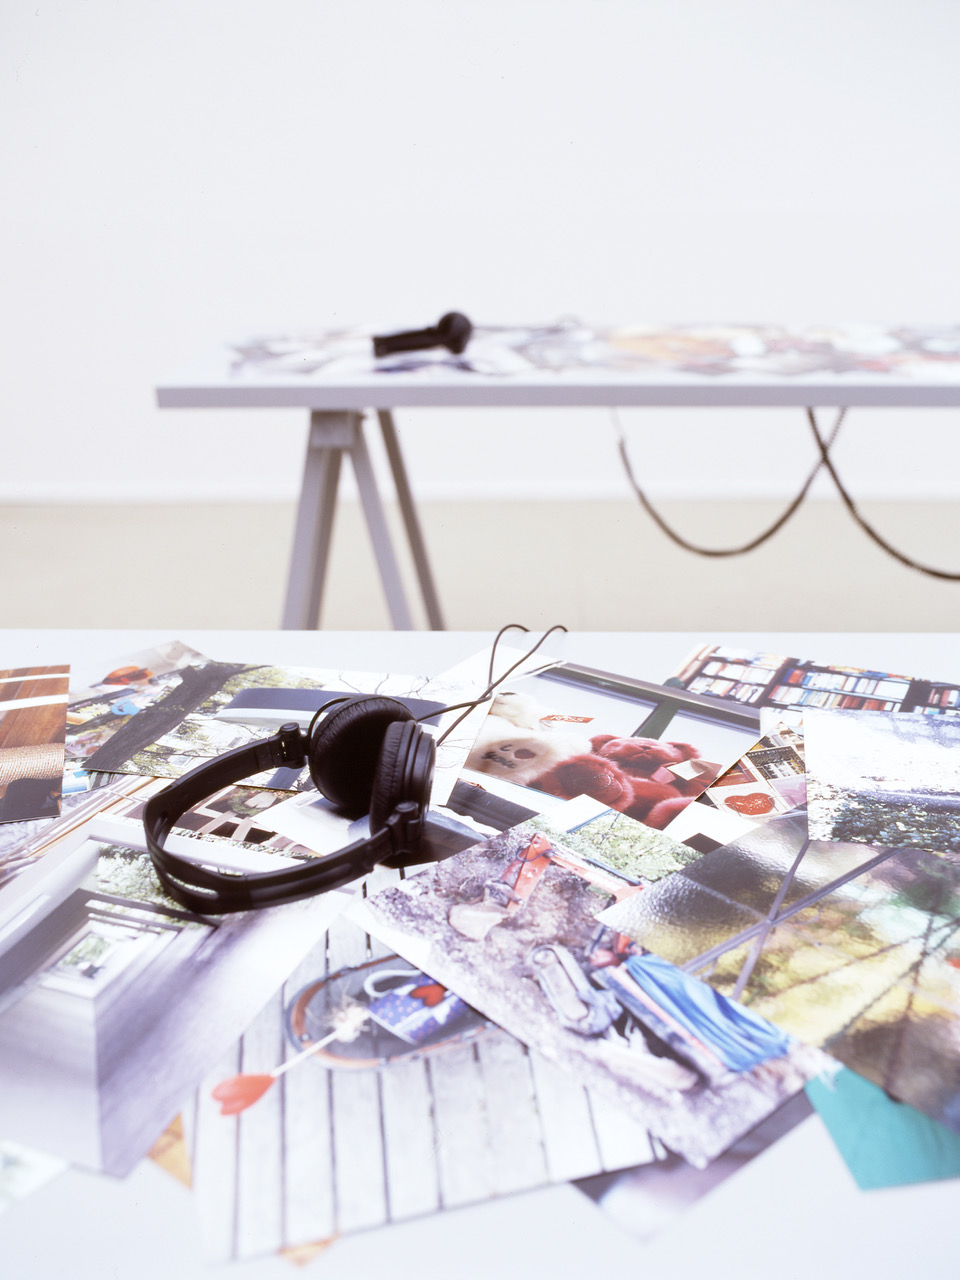 A close-up picture showing the top of one table in the PLOTS installation, which looks like it is printed with color photographs of a variety of everyday things. There are headphones on the table.